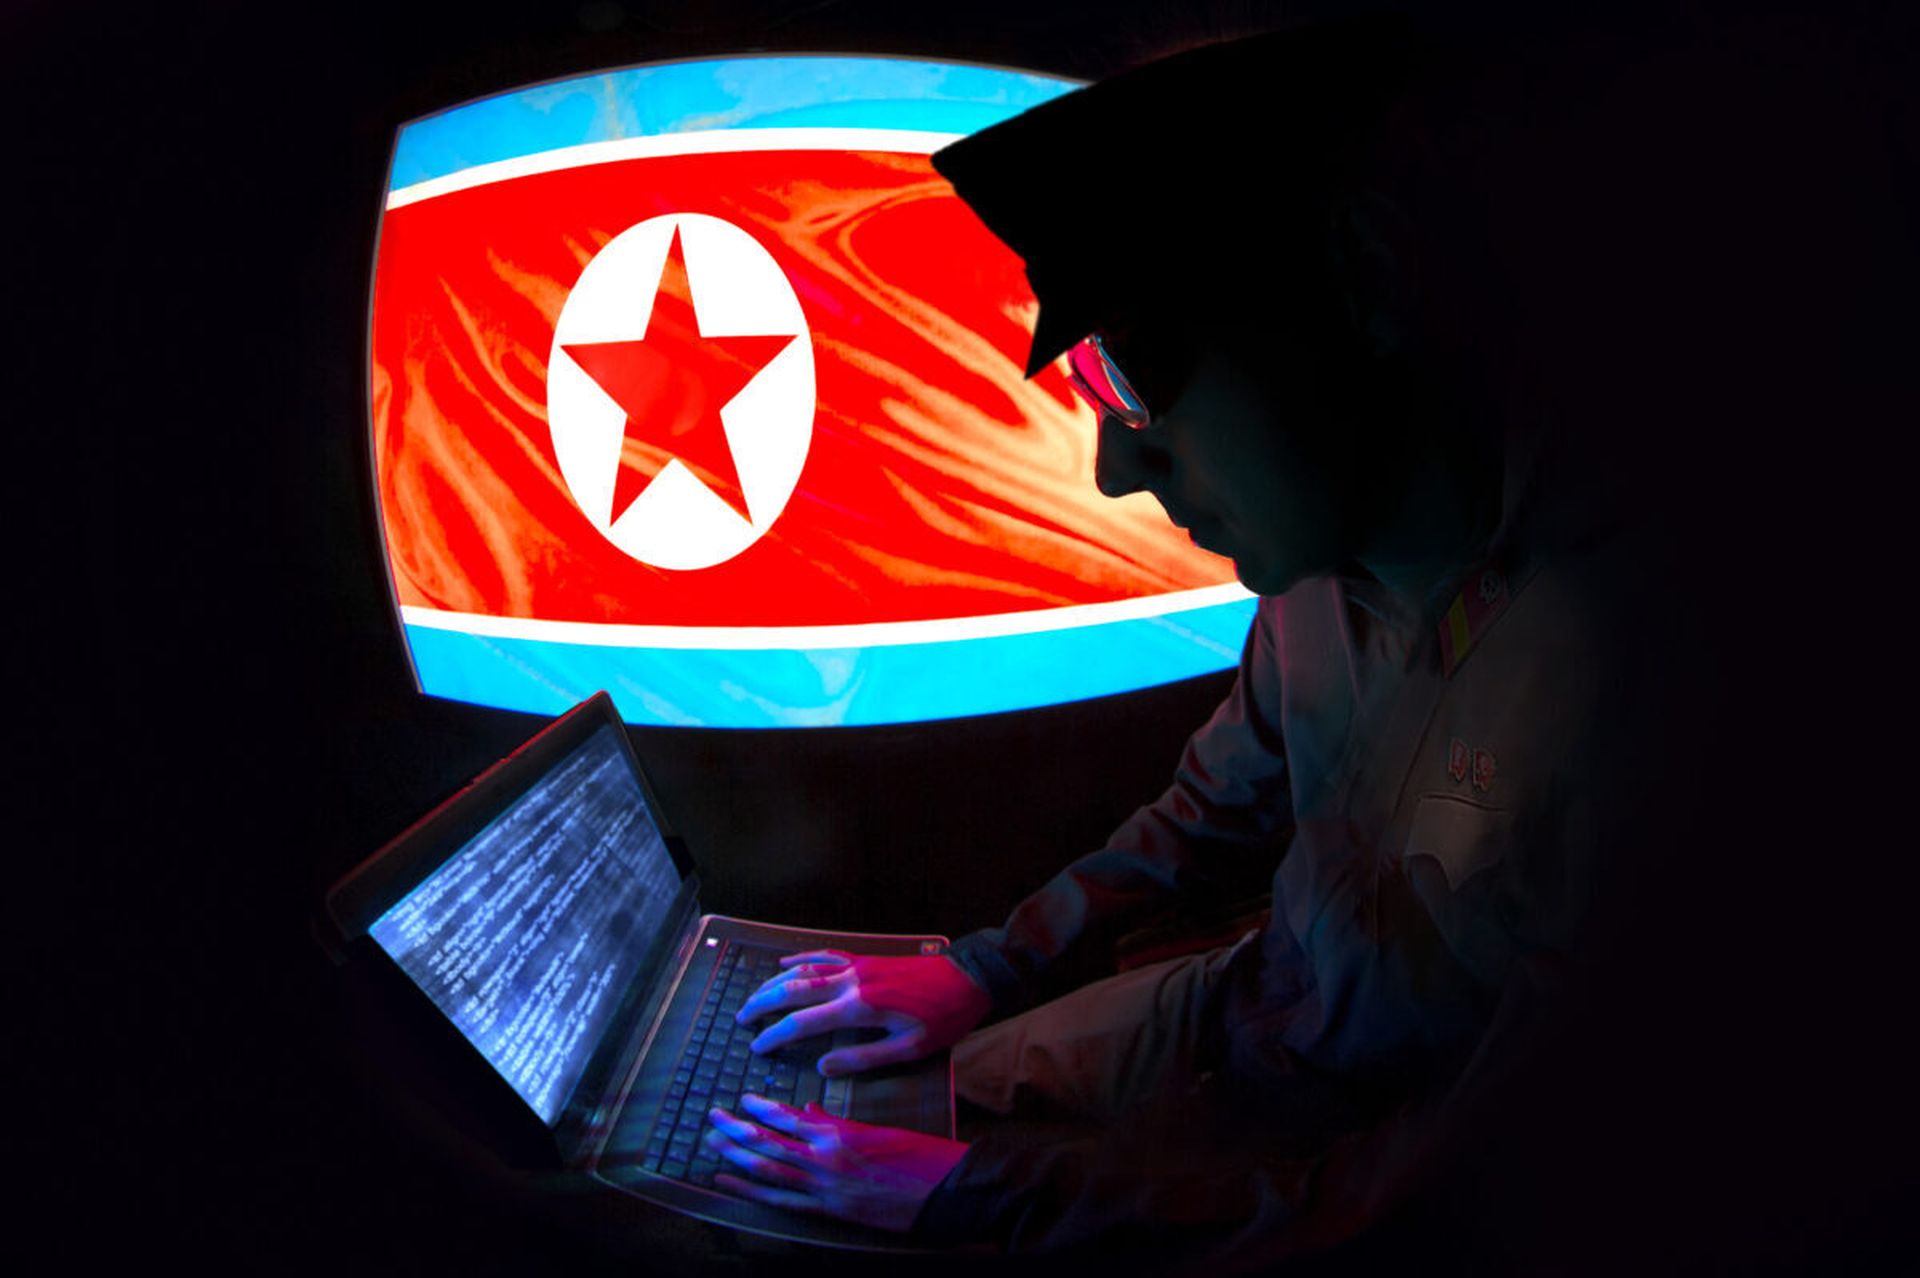 Researchers at ESET say they have found a new piece of Linux-based malware that expands on existing evidence that the 3CX software supply chain hack was conducted by North Korean actors. (Image Credit: Bill Hinton via Getty Images)